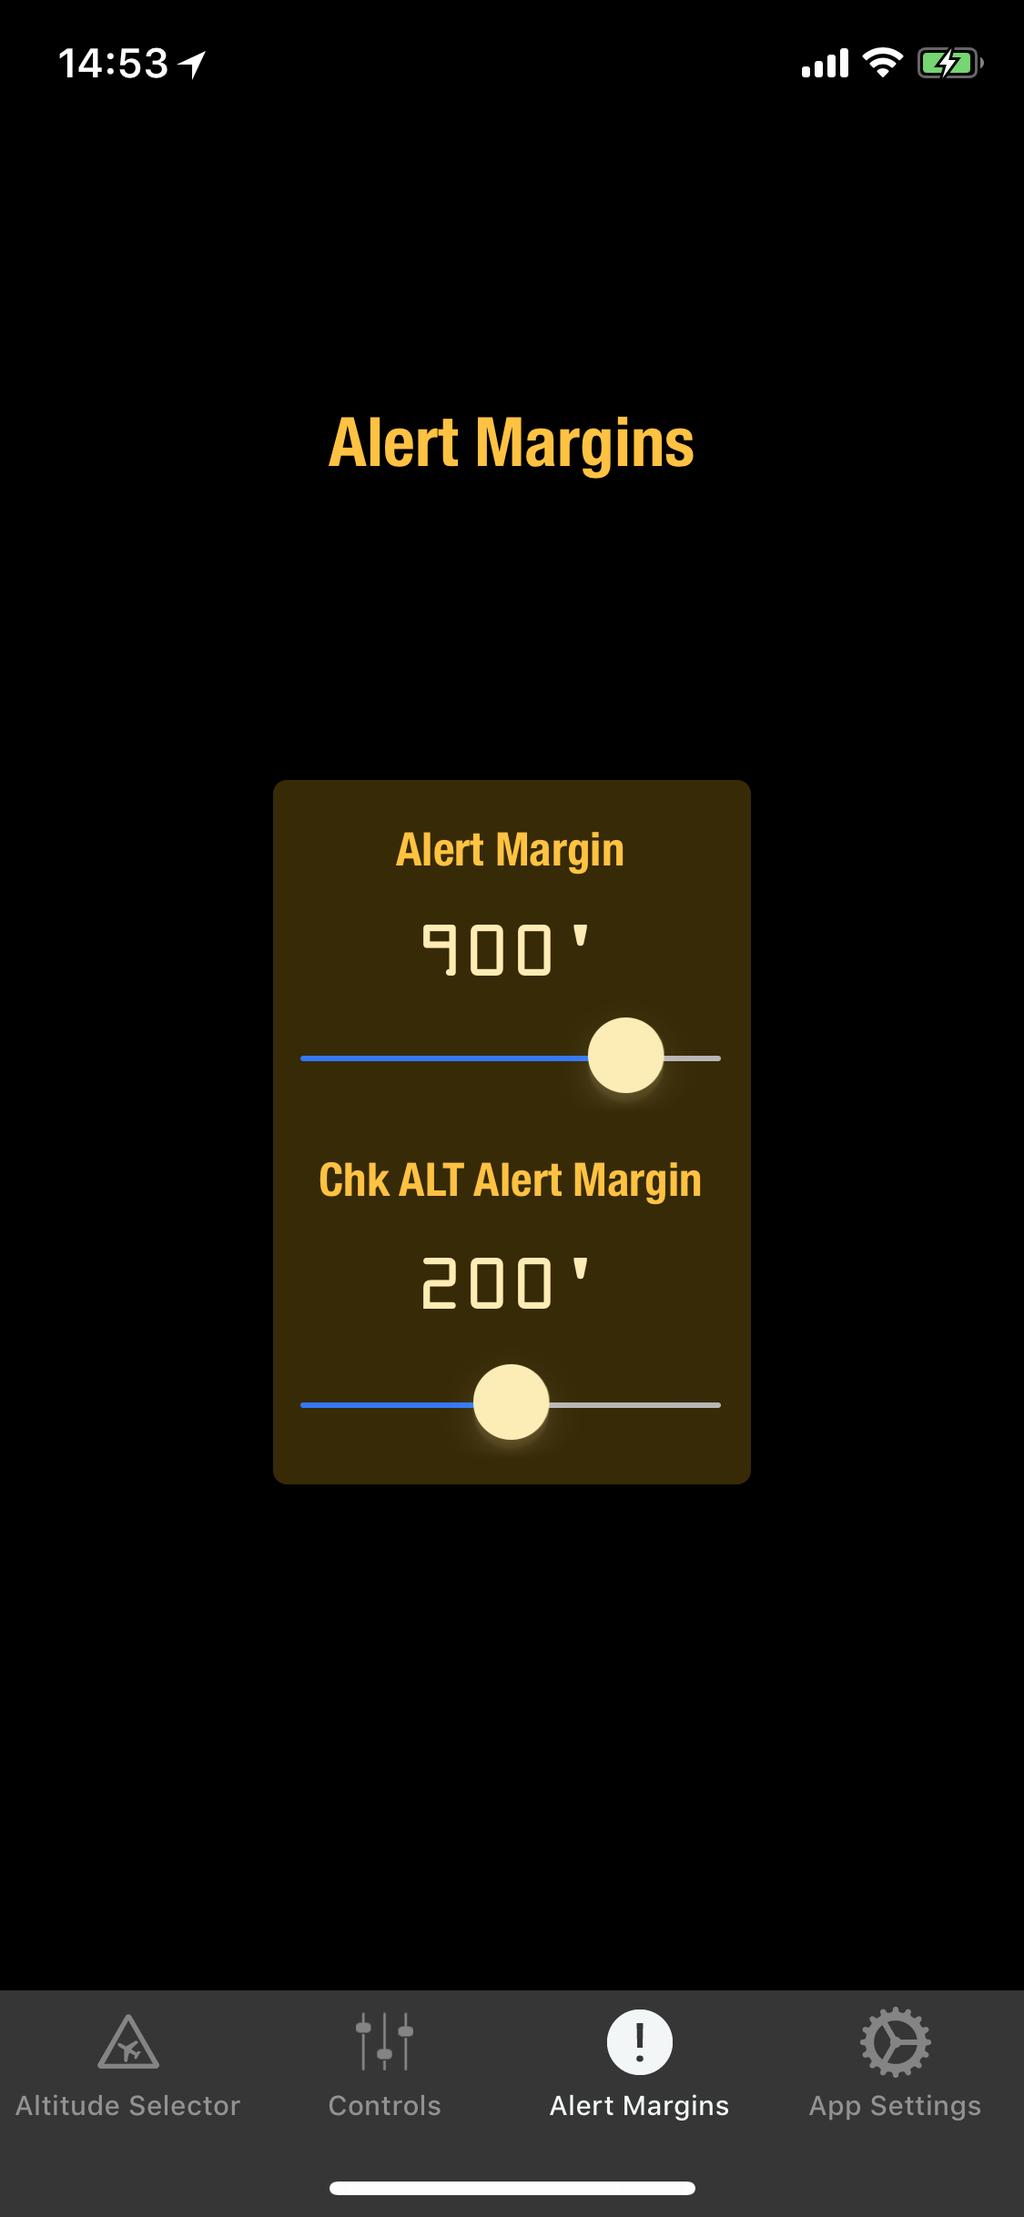 Alert Margins Tab: Alerting Margins: The Alert Margin and Chk ALT Alert Margin are the margins (or triggers, if you prefer) where the applicable alerts are generated.